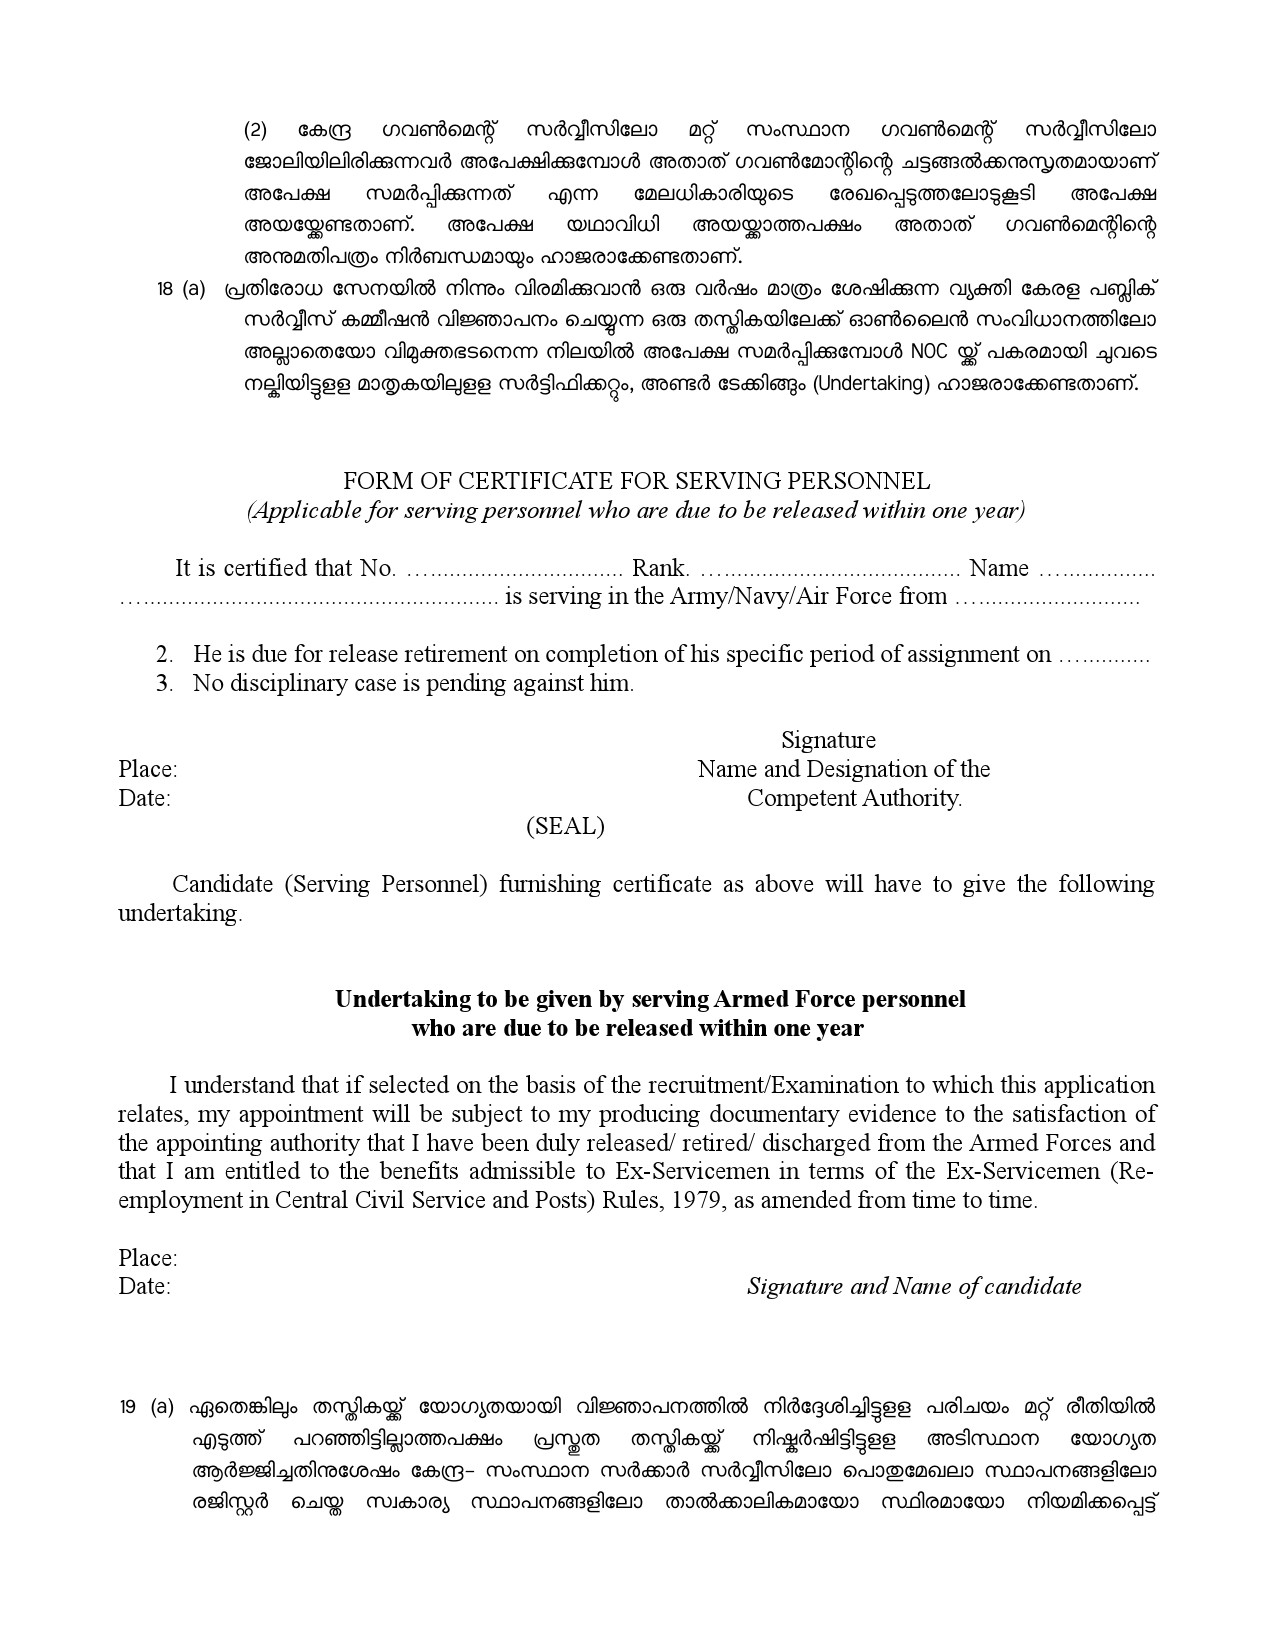 General Conditions and Certificate Formats in Malayalam - Notification Image 21